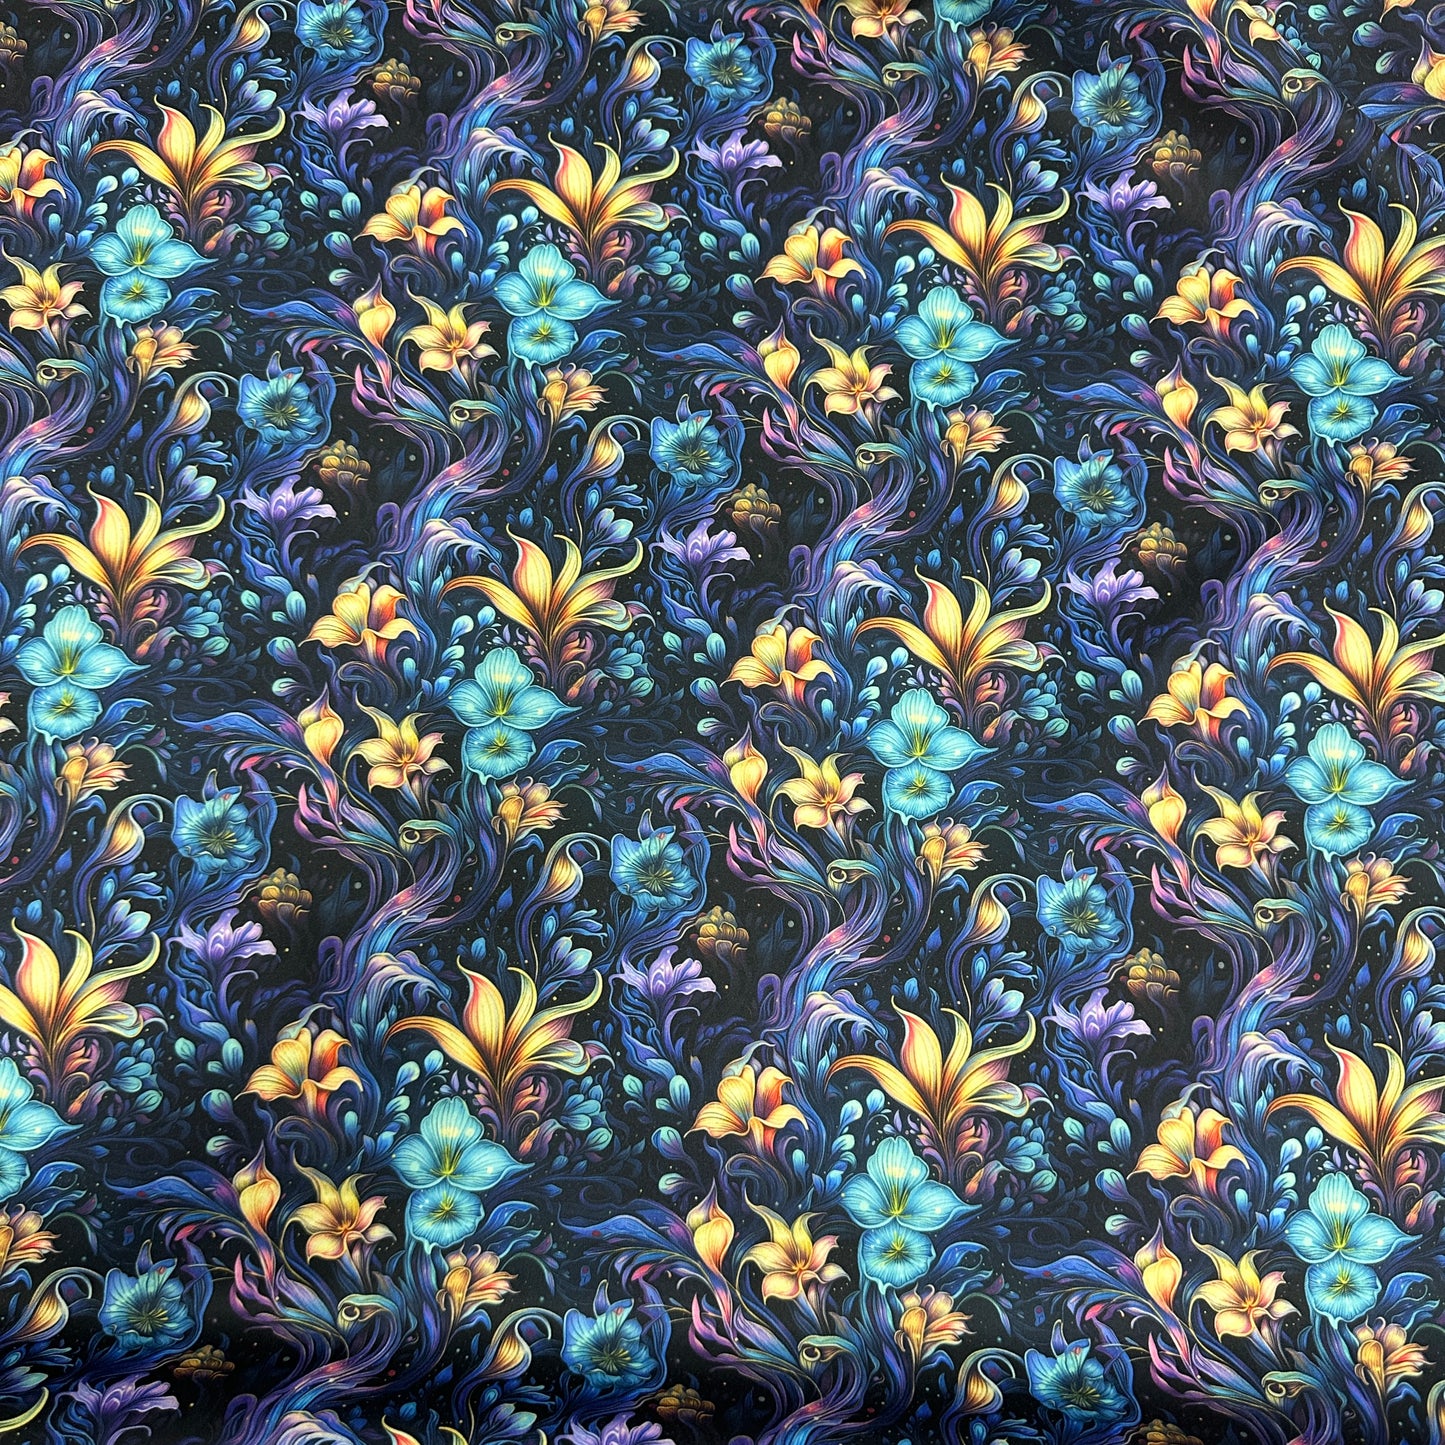 Vivid Floral Bioluminescence 1 mil PUL Fabric - Made in the USA